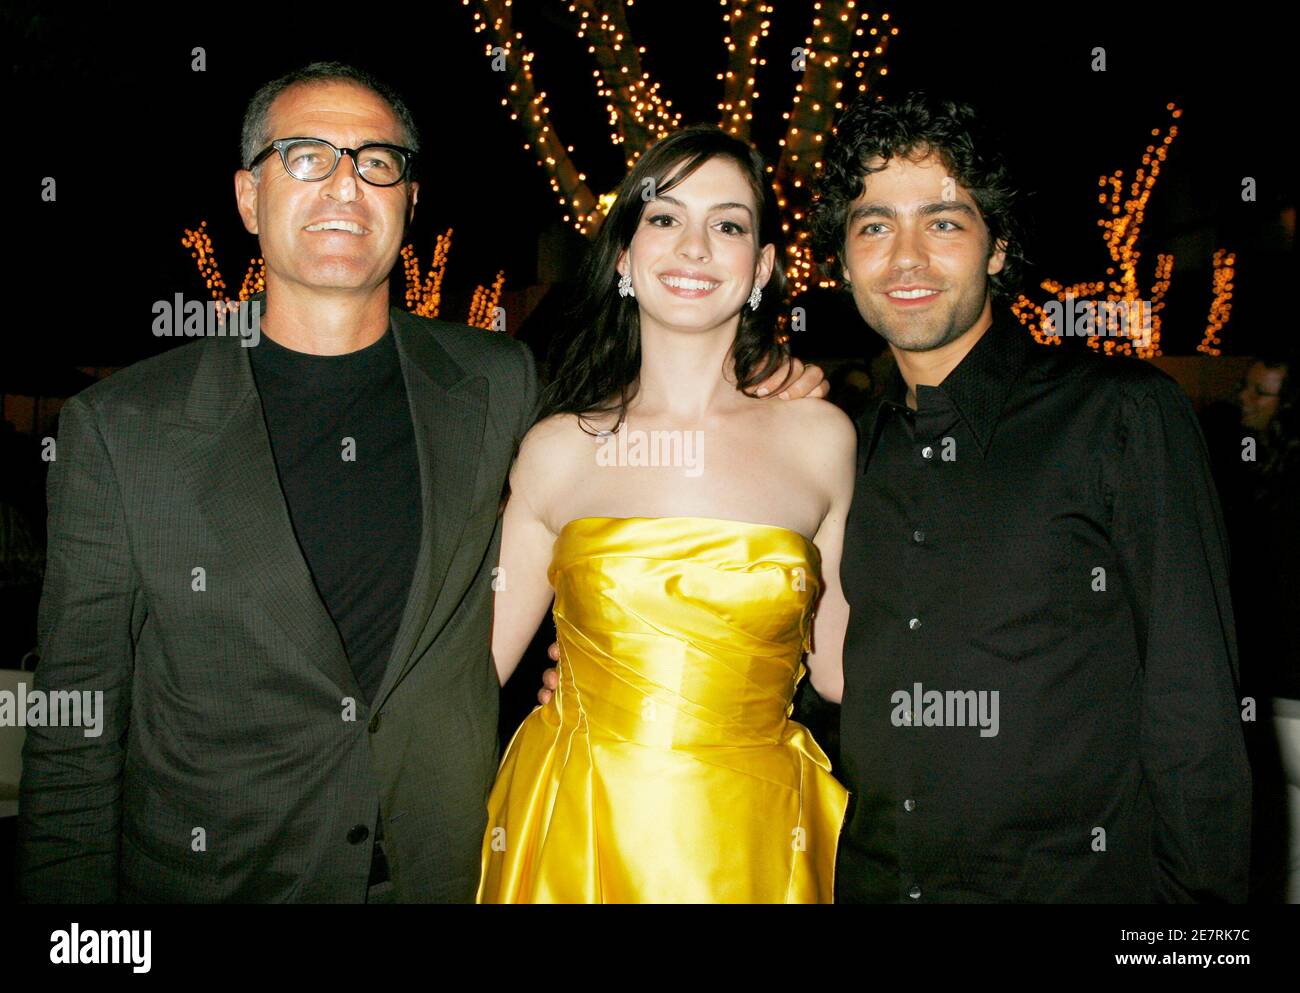 Actors Anne Hathaway (C) and Adrian Grenier, stars of the film 'The Devil Wears Prada', pose with the film's director David Frankel (L) at the party after the screening of the film at the opening night of the Los Angeles Film Festival in Los Angeles June 22, 2006.[The film is set in the world of a high powered fashion magazine.] Stock Photo